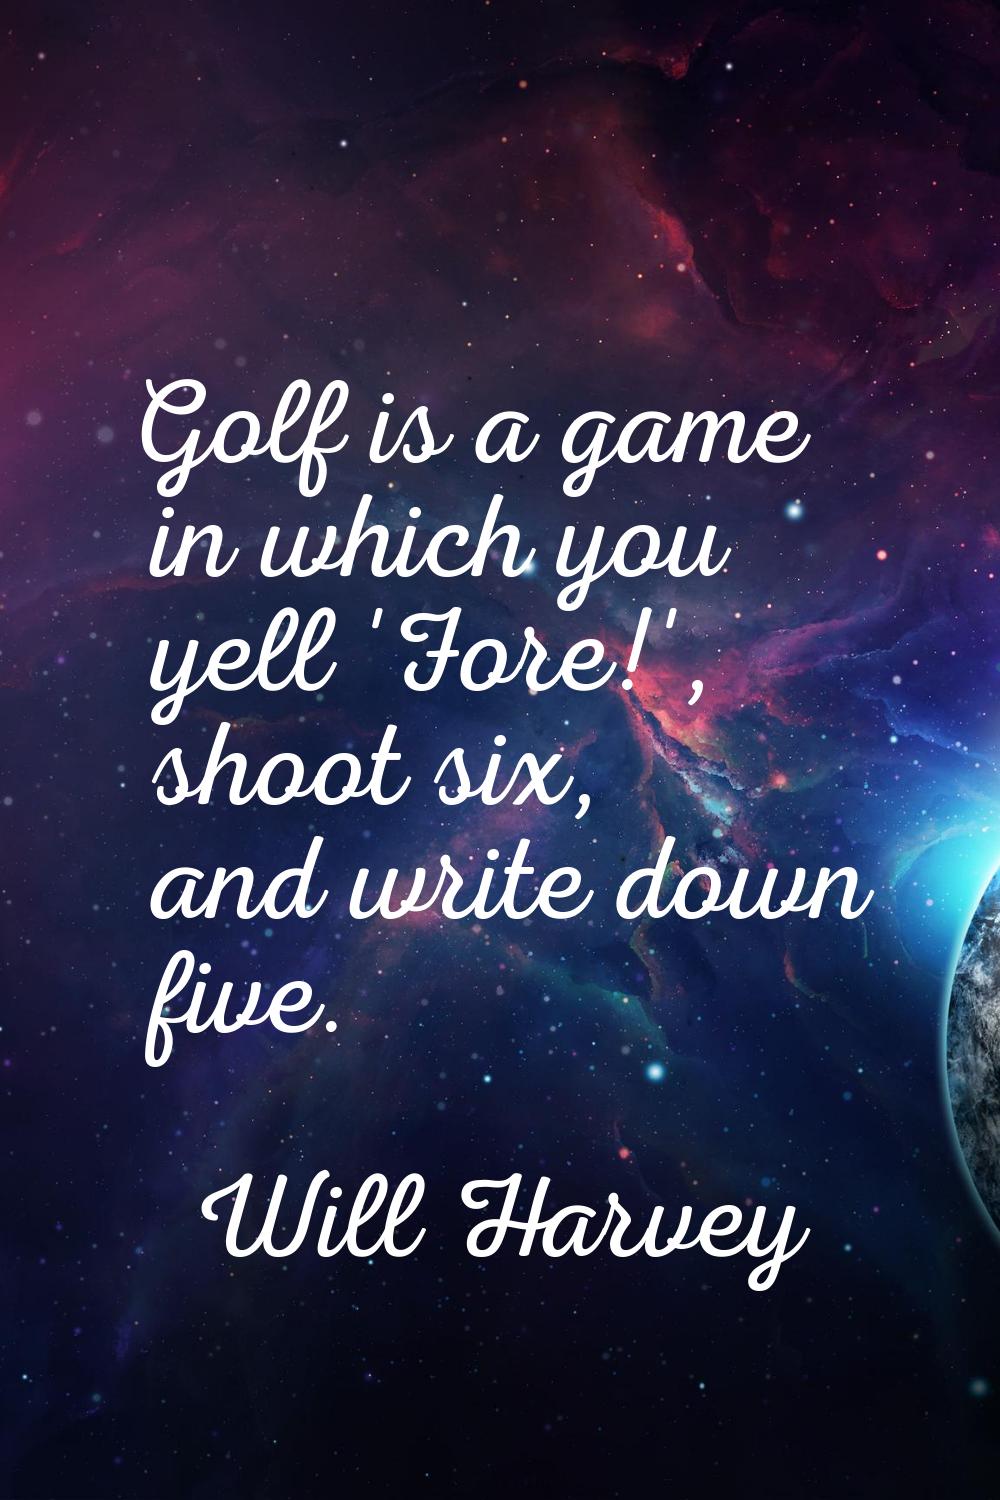 Golf is a game in which you yell 'Fore!', shoot six, and write down five.